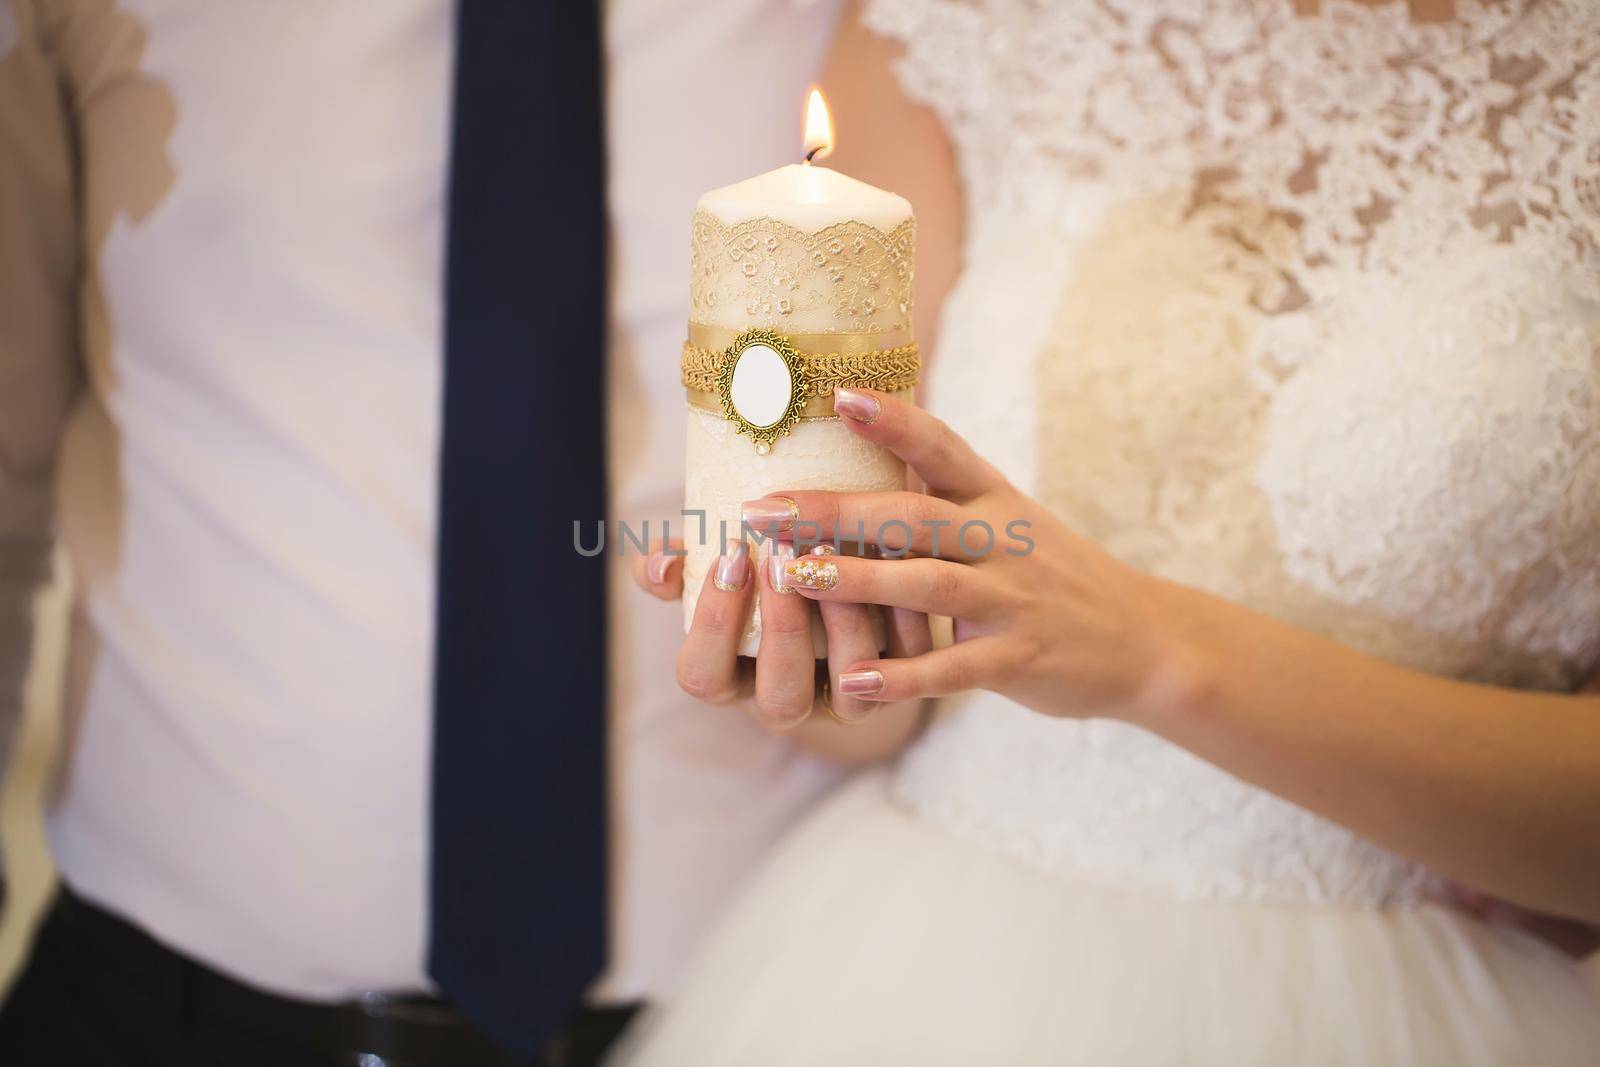 Wedding ceremony, paraphernalia, the bride and groom hold a large candle in their hand